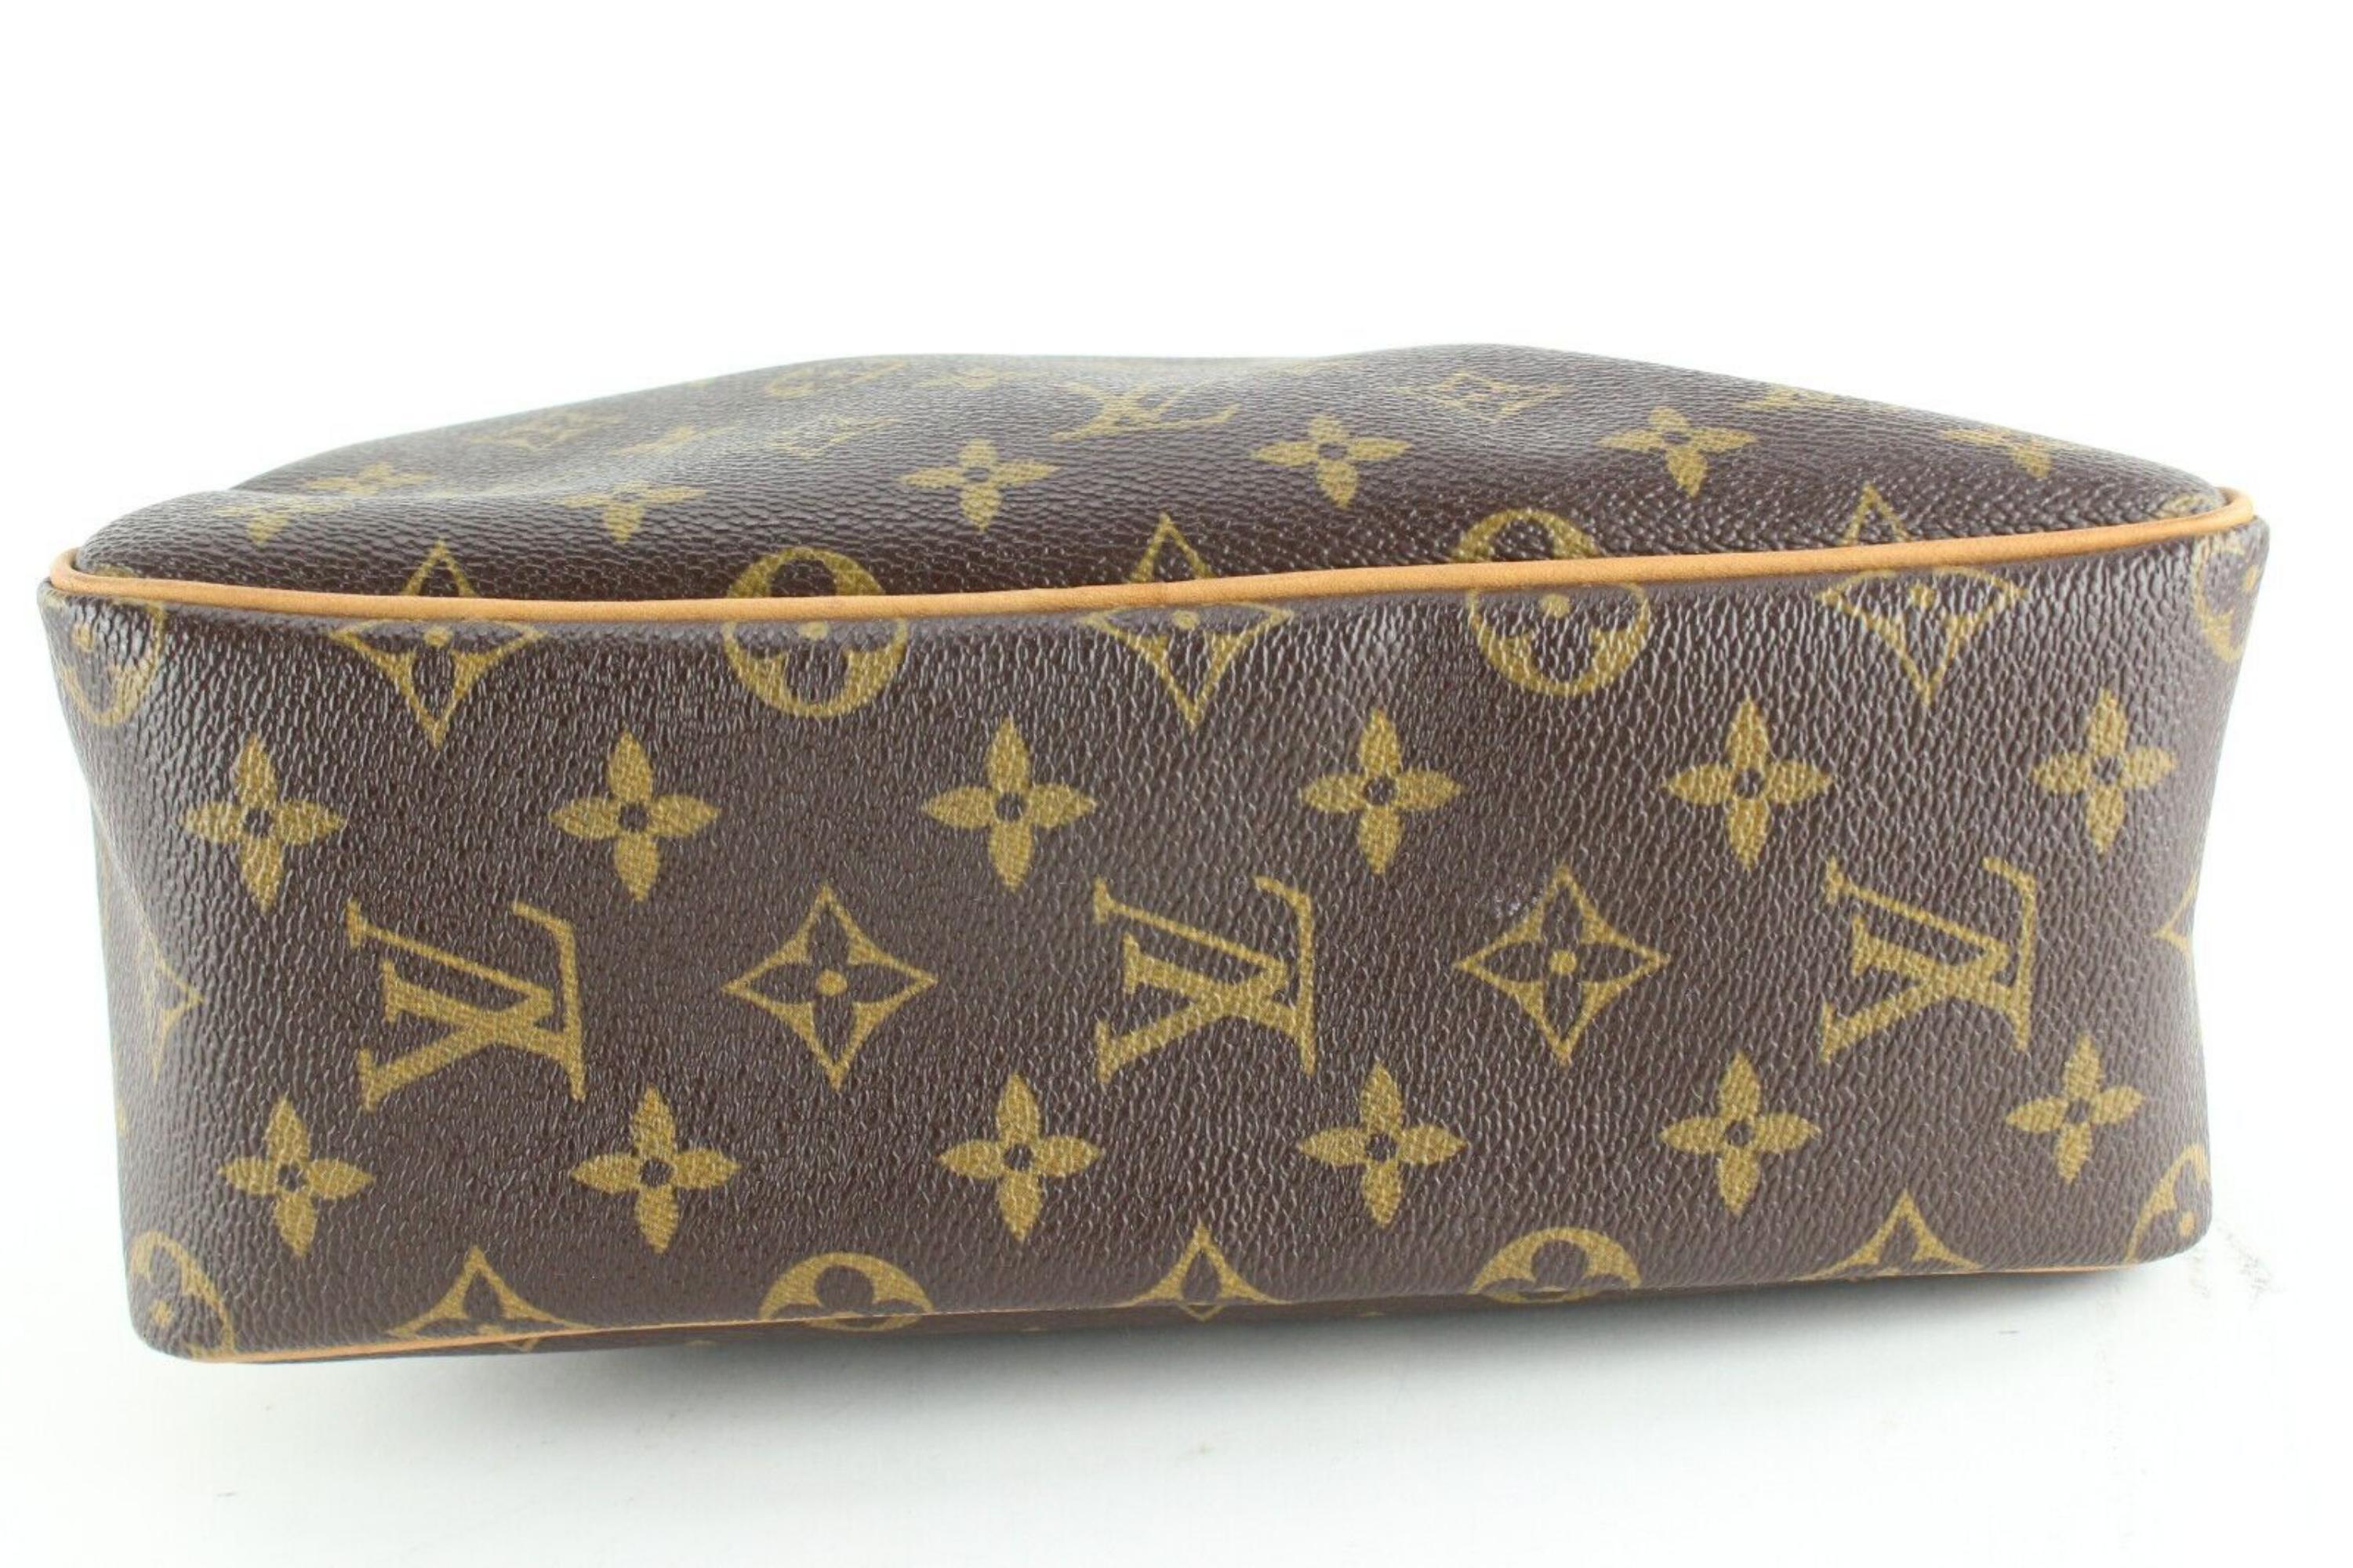 Louis Vuitton Monogram Toiletry 25 Trousse NM Cosmetic Pouch 6LV0123 For Sale 1